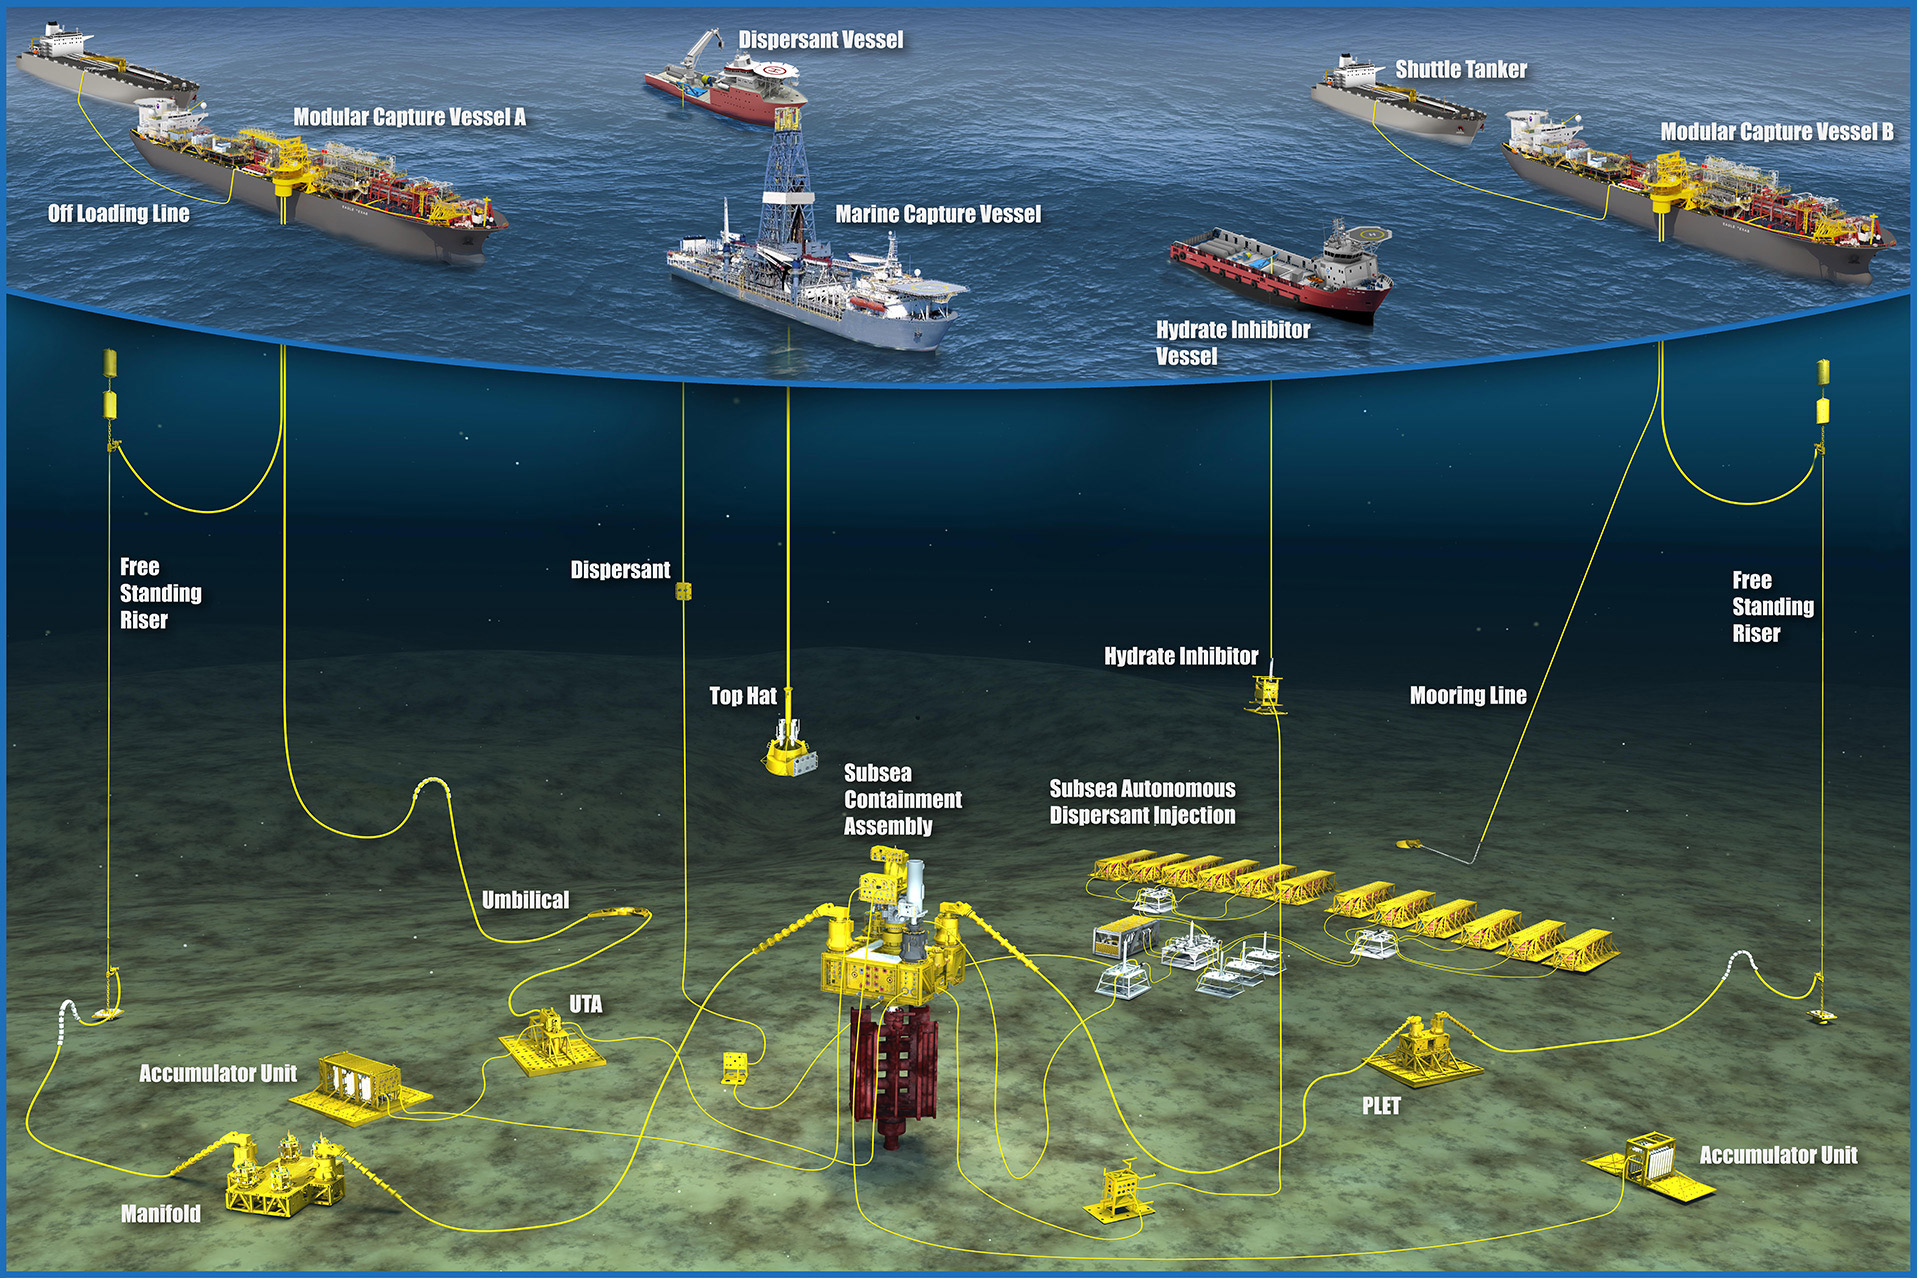 Image Photo— Marine Well Containment System overview